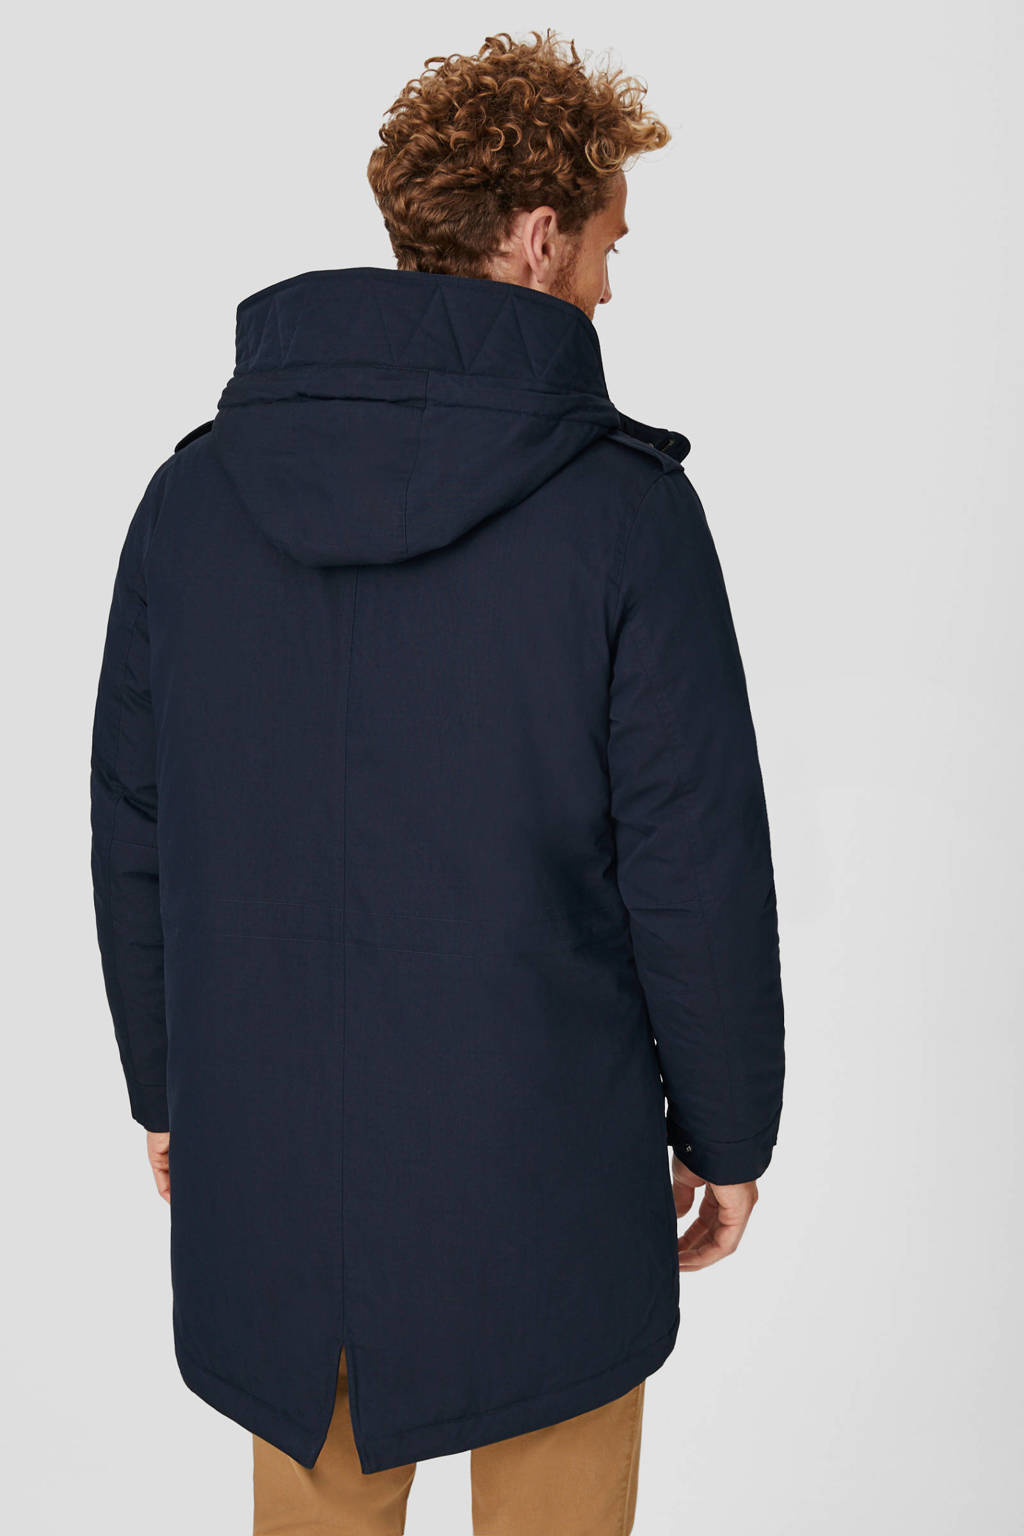 Friday Adept Setting C&A Angelo Litrico parka donkerblauw | wehkamp